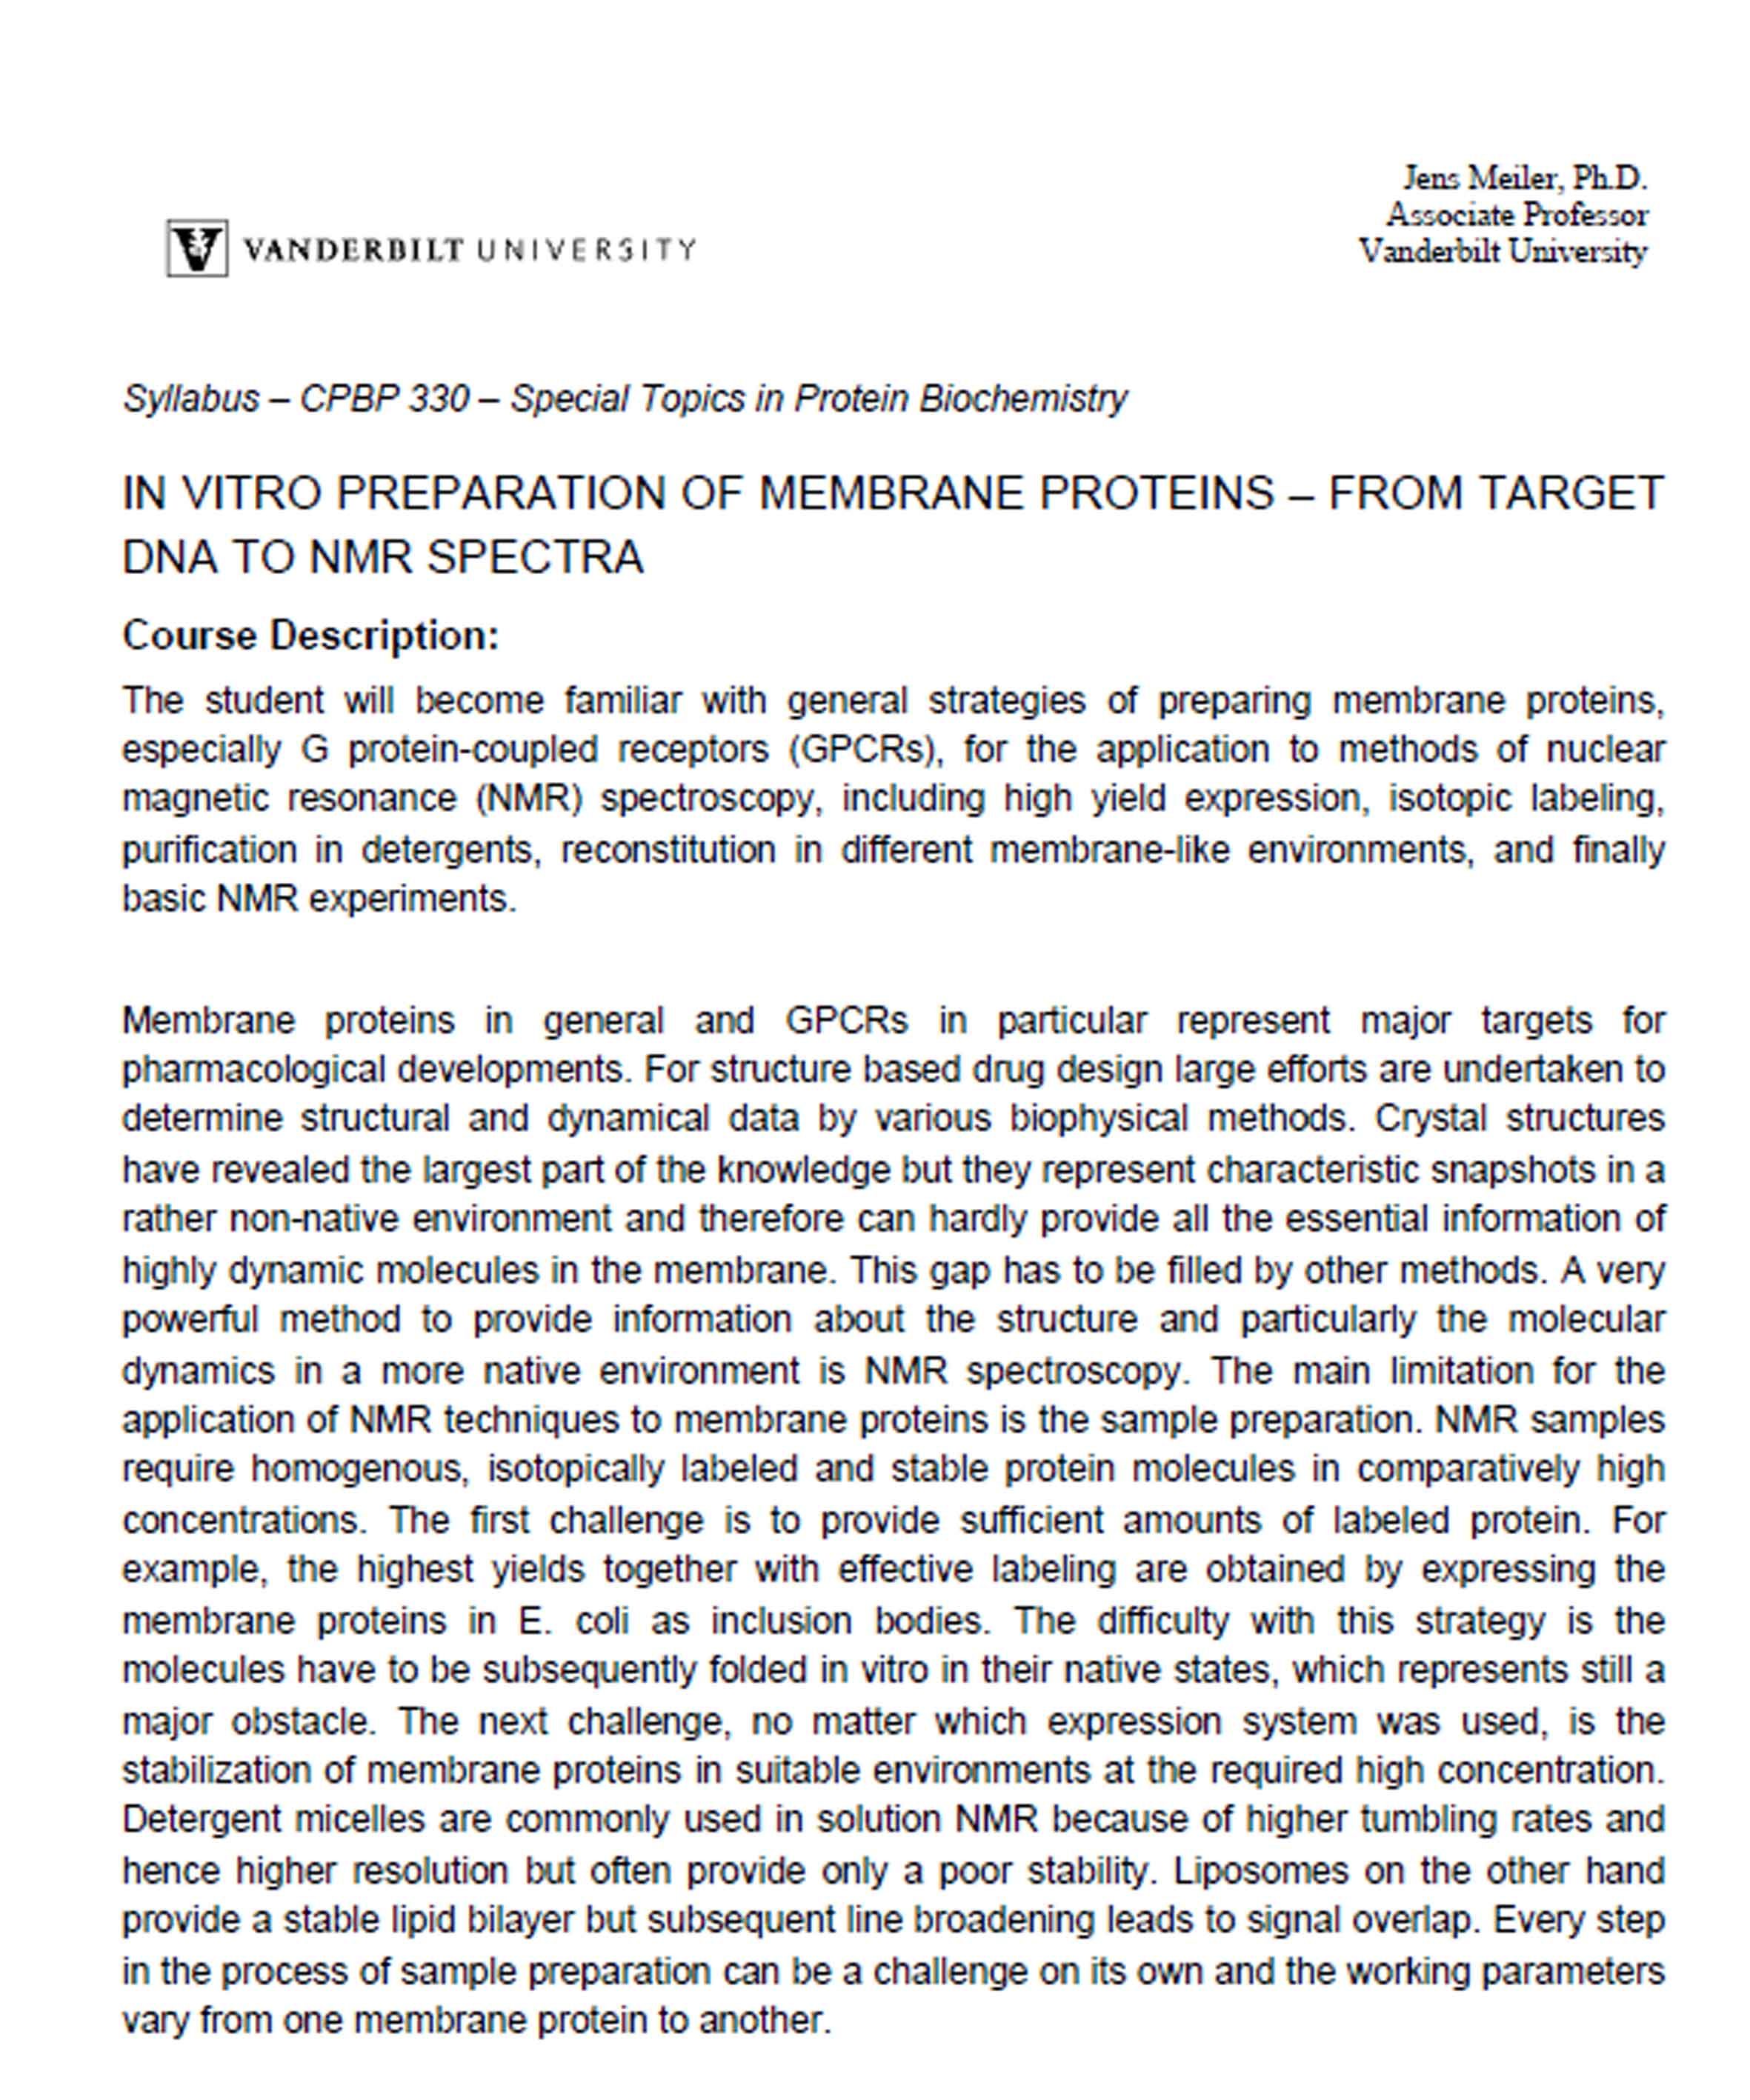 Course on “In vitro Preparation of Membrane Proteins – from Target DNA to NMR Spectra” at Vanderbilt University